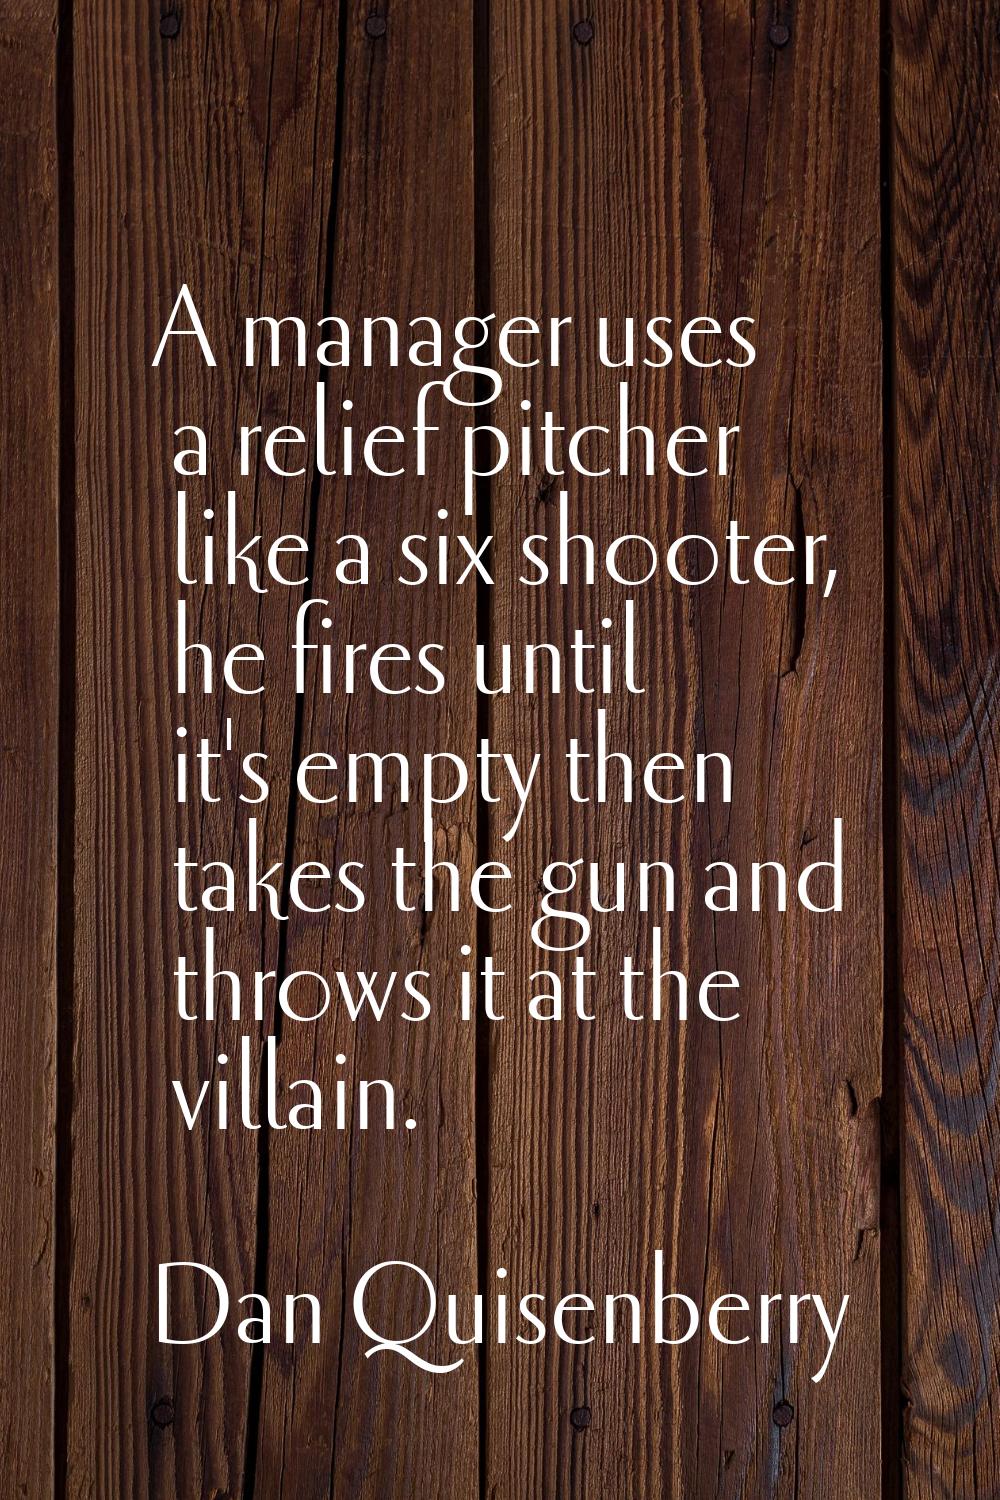 A manager uses a relief pitcher like a six shooter, he fires until it's empty then takes the gun an